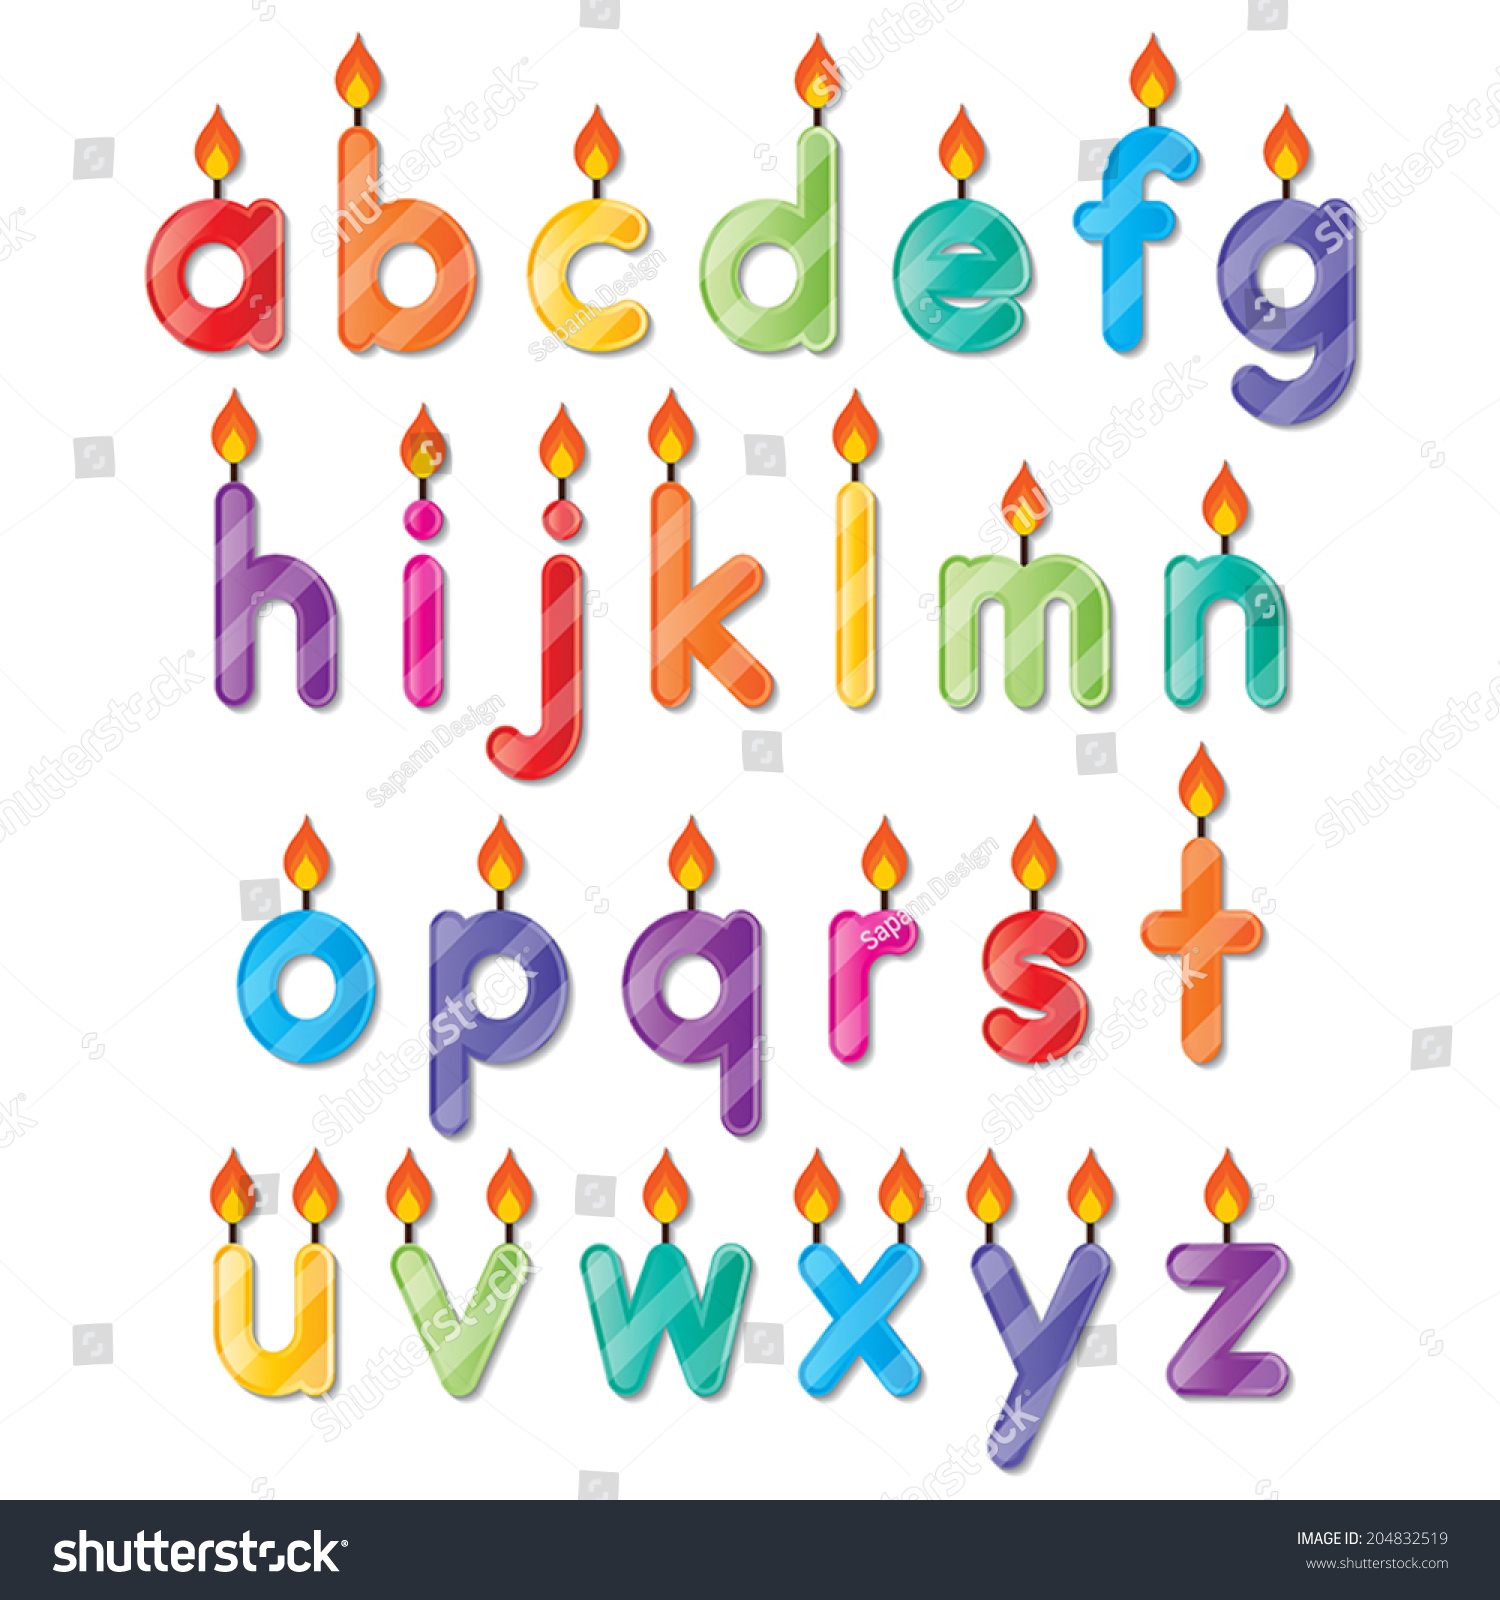 SVG of set of colorful small alphabet letters a to z candles. vector. svg